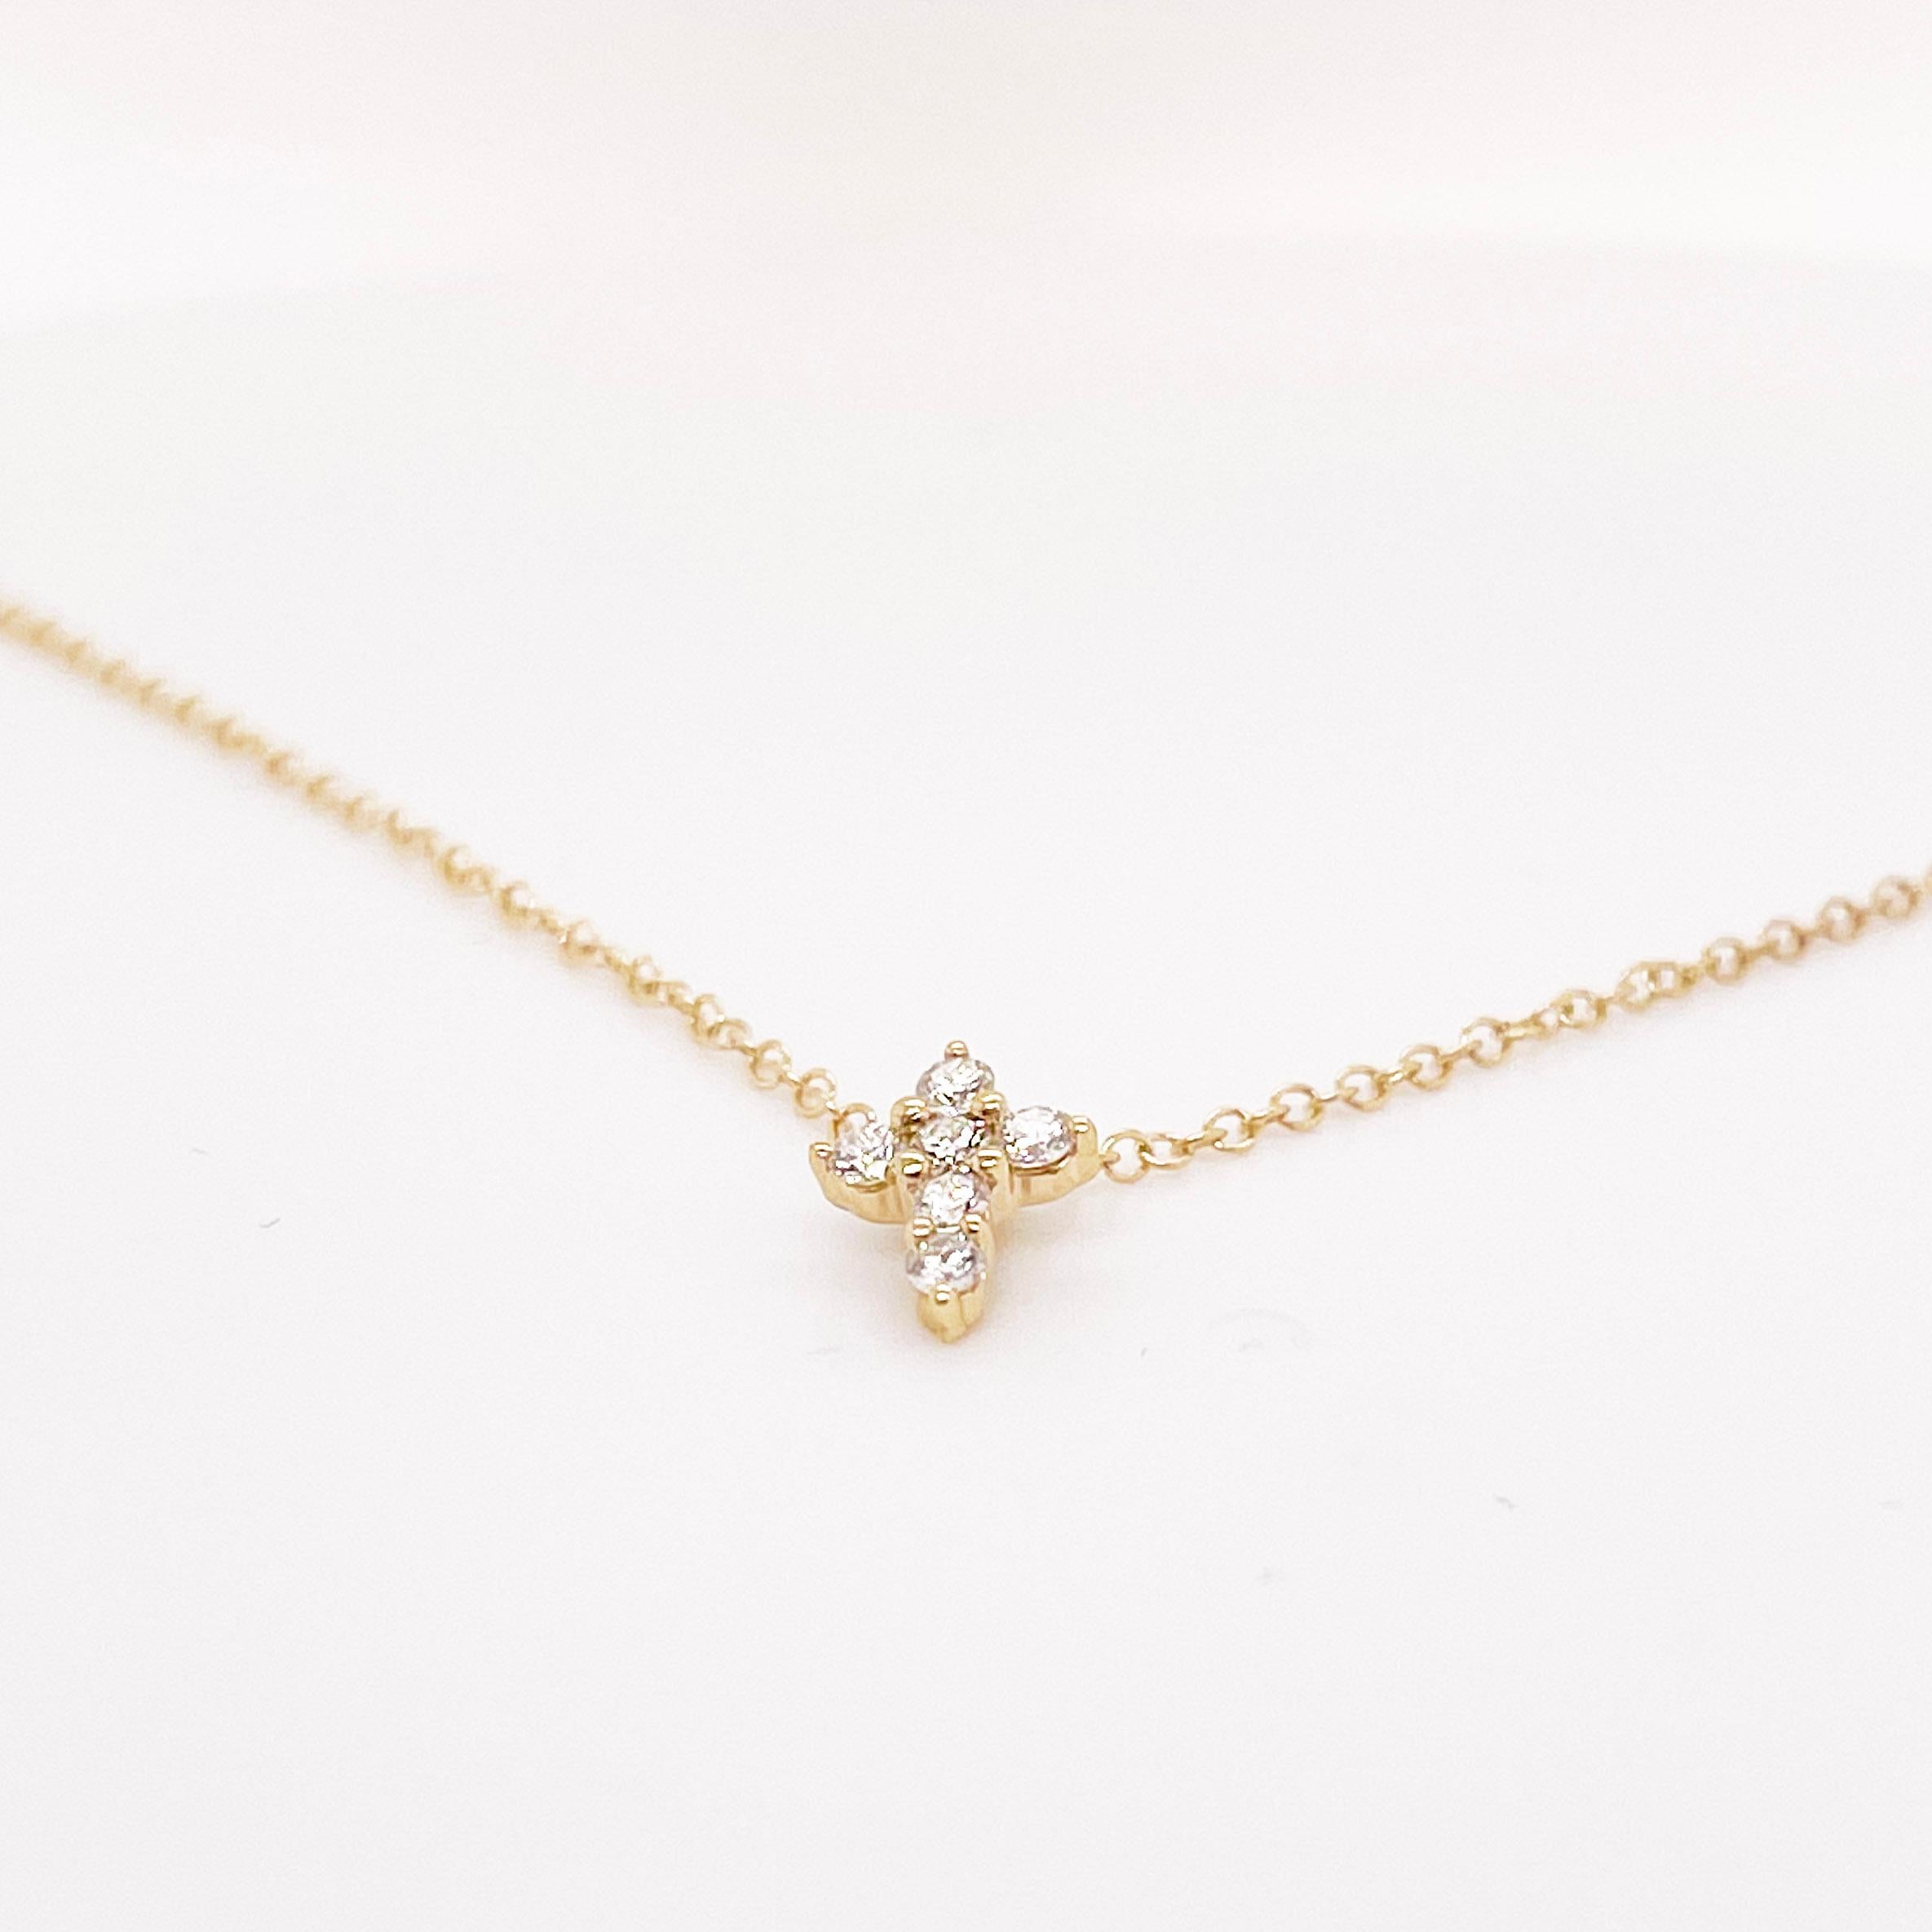 This petite diamond cross necklace is a perfect everyday piece and made even more sleek and stylish by the hidden bail making the cross seem to float on the beautifully slim and durable cable link chain. The petite cross is subtle, but offers